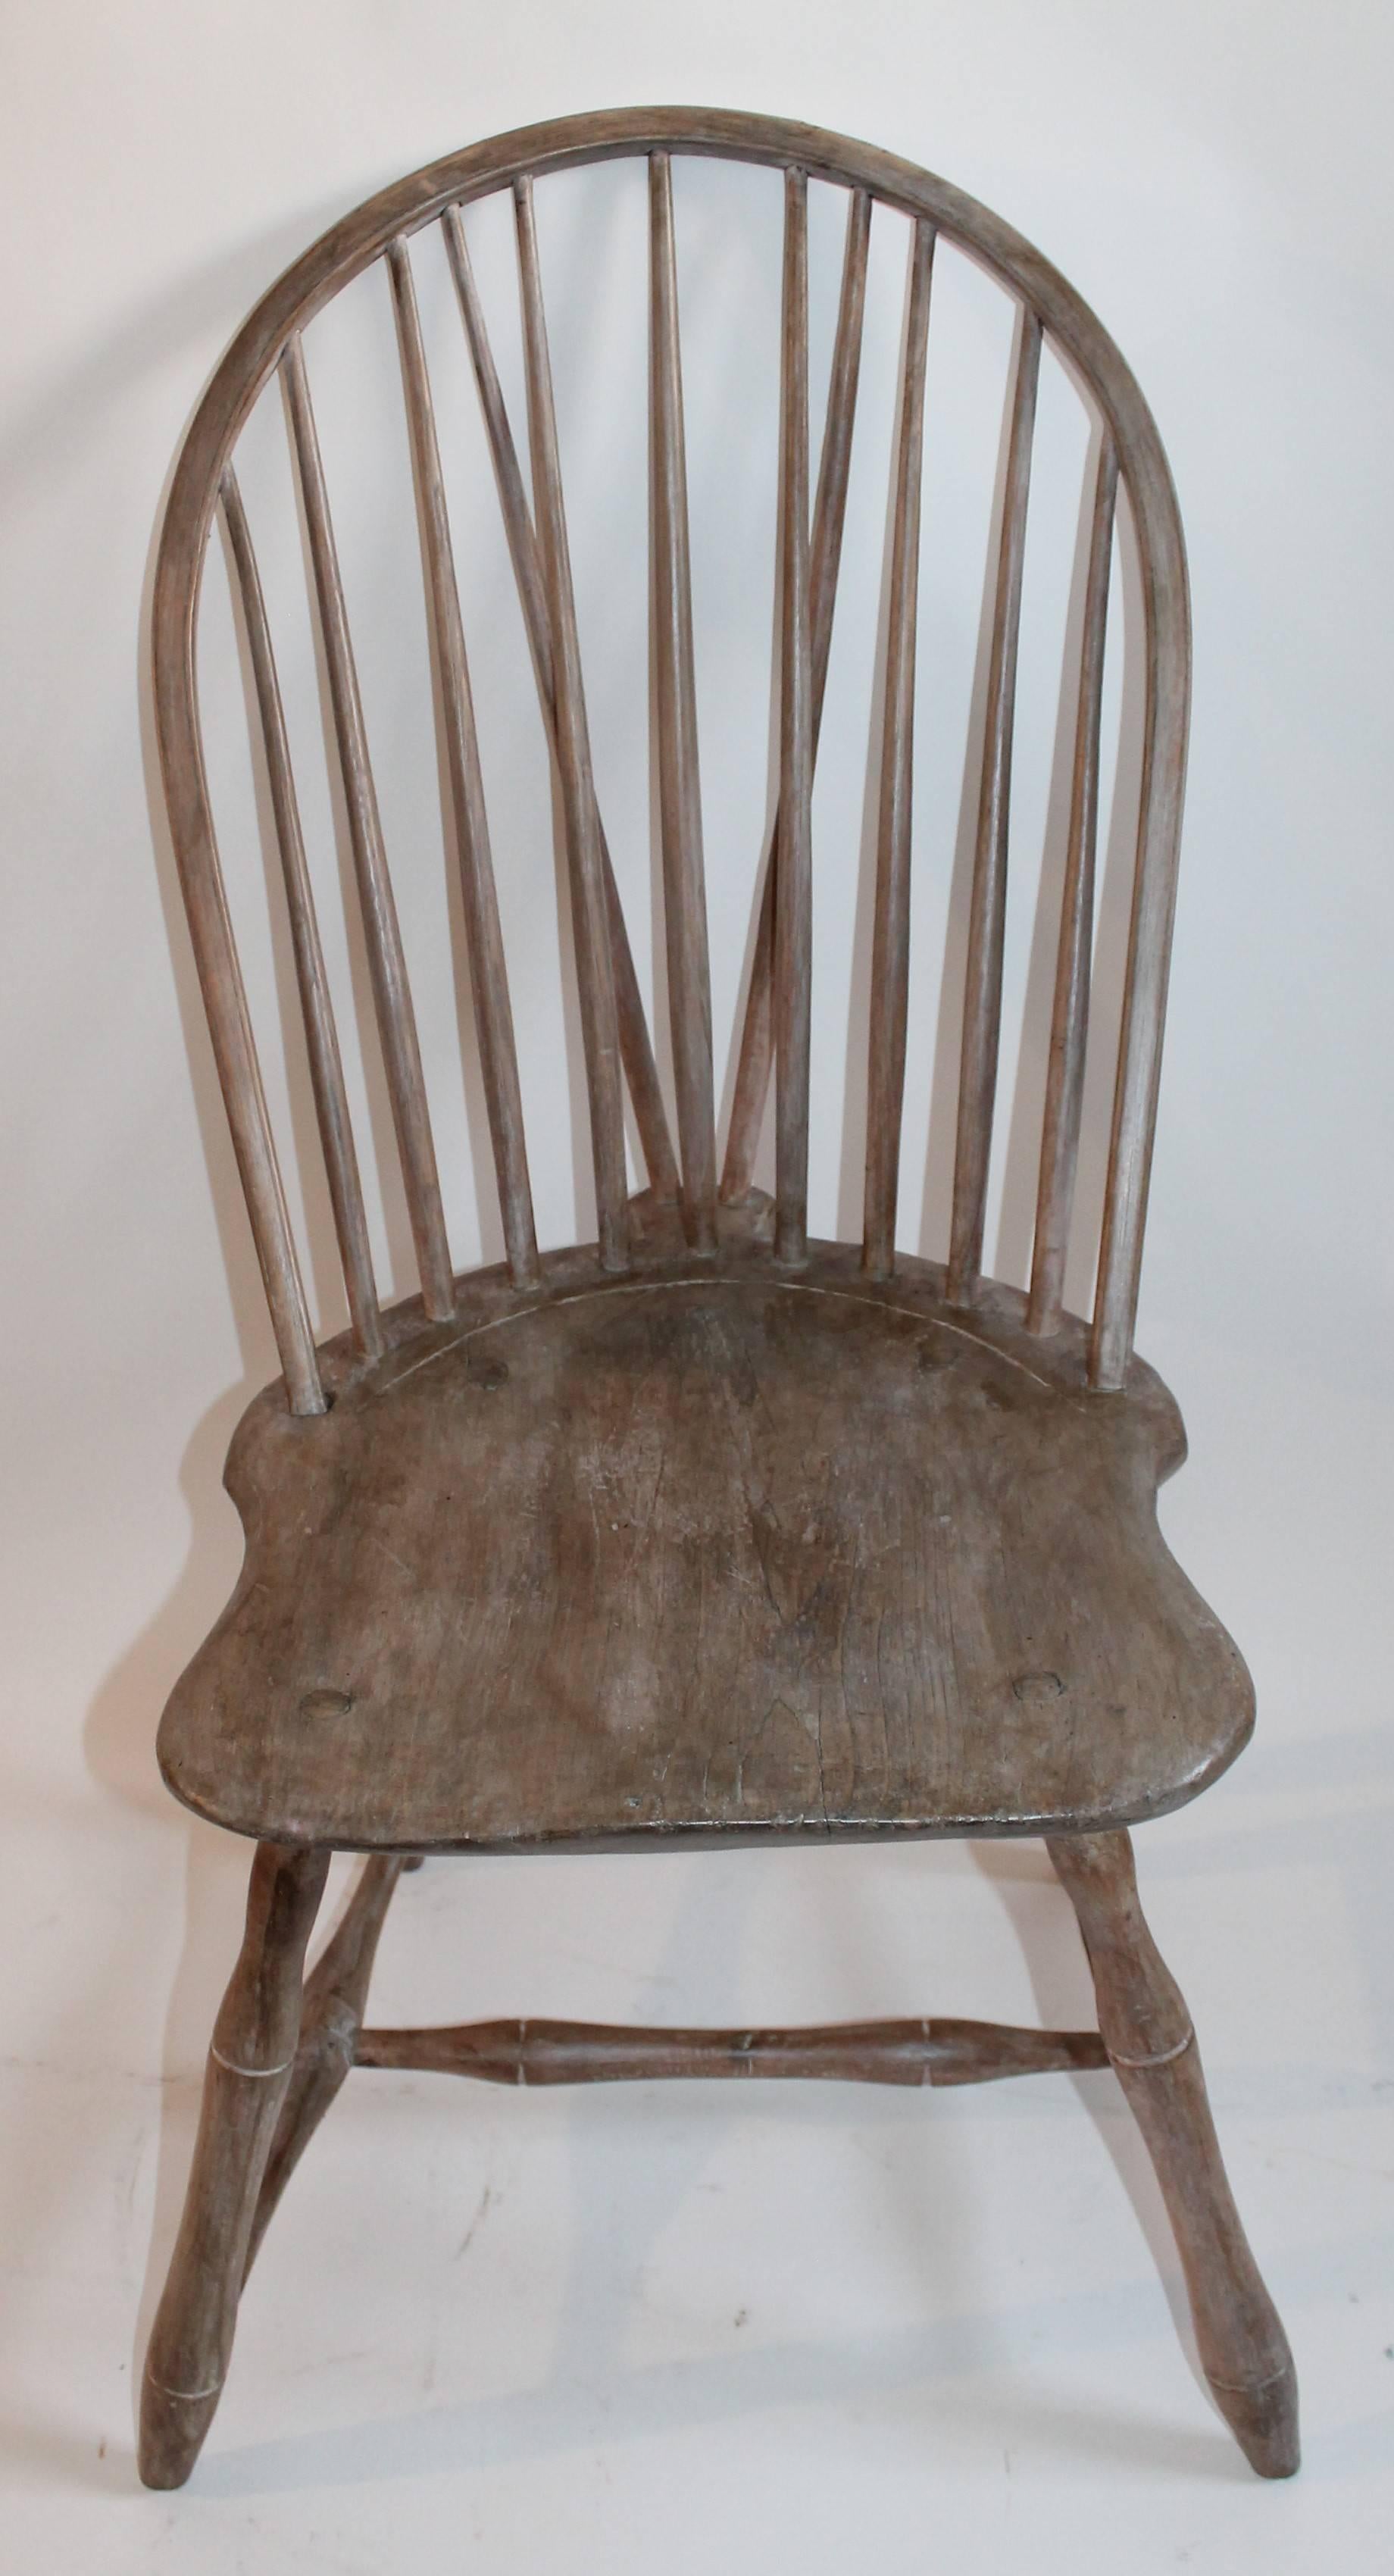 This fine and worn brace back 18th century Windsor chair is in great condition with a fantastic aged patina. This fine chair was found in New England.